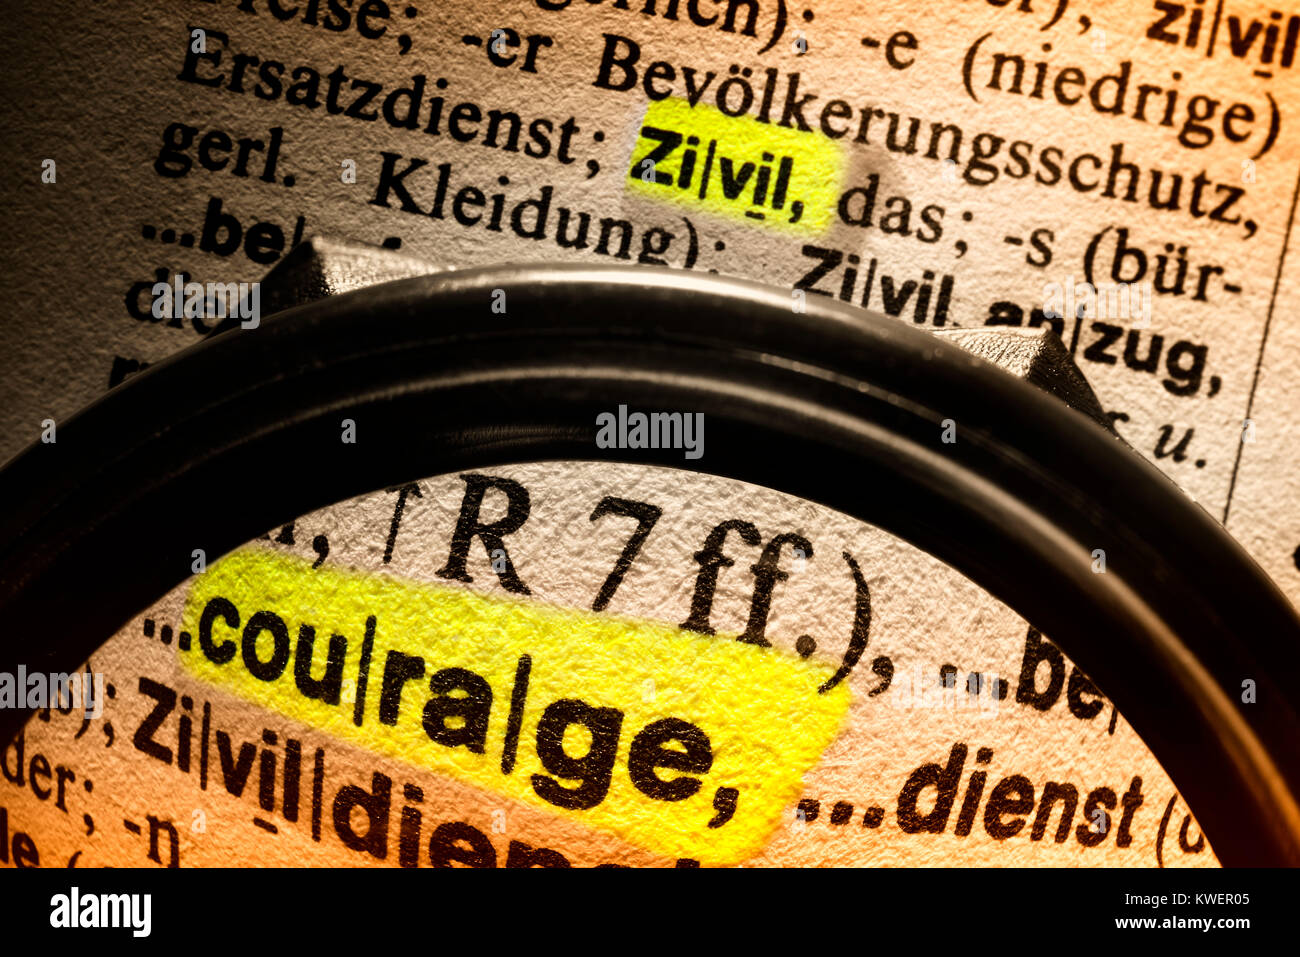 The word Courage of the convictions in a dictionary under the magnifying glass, Das Wort Zivilcourage in einem W?rterbuch unter der Lupe, Das Wort Ziv Stock Photo